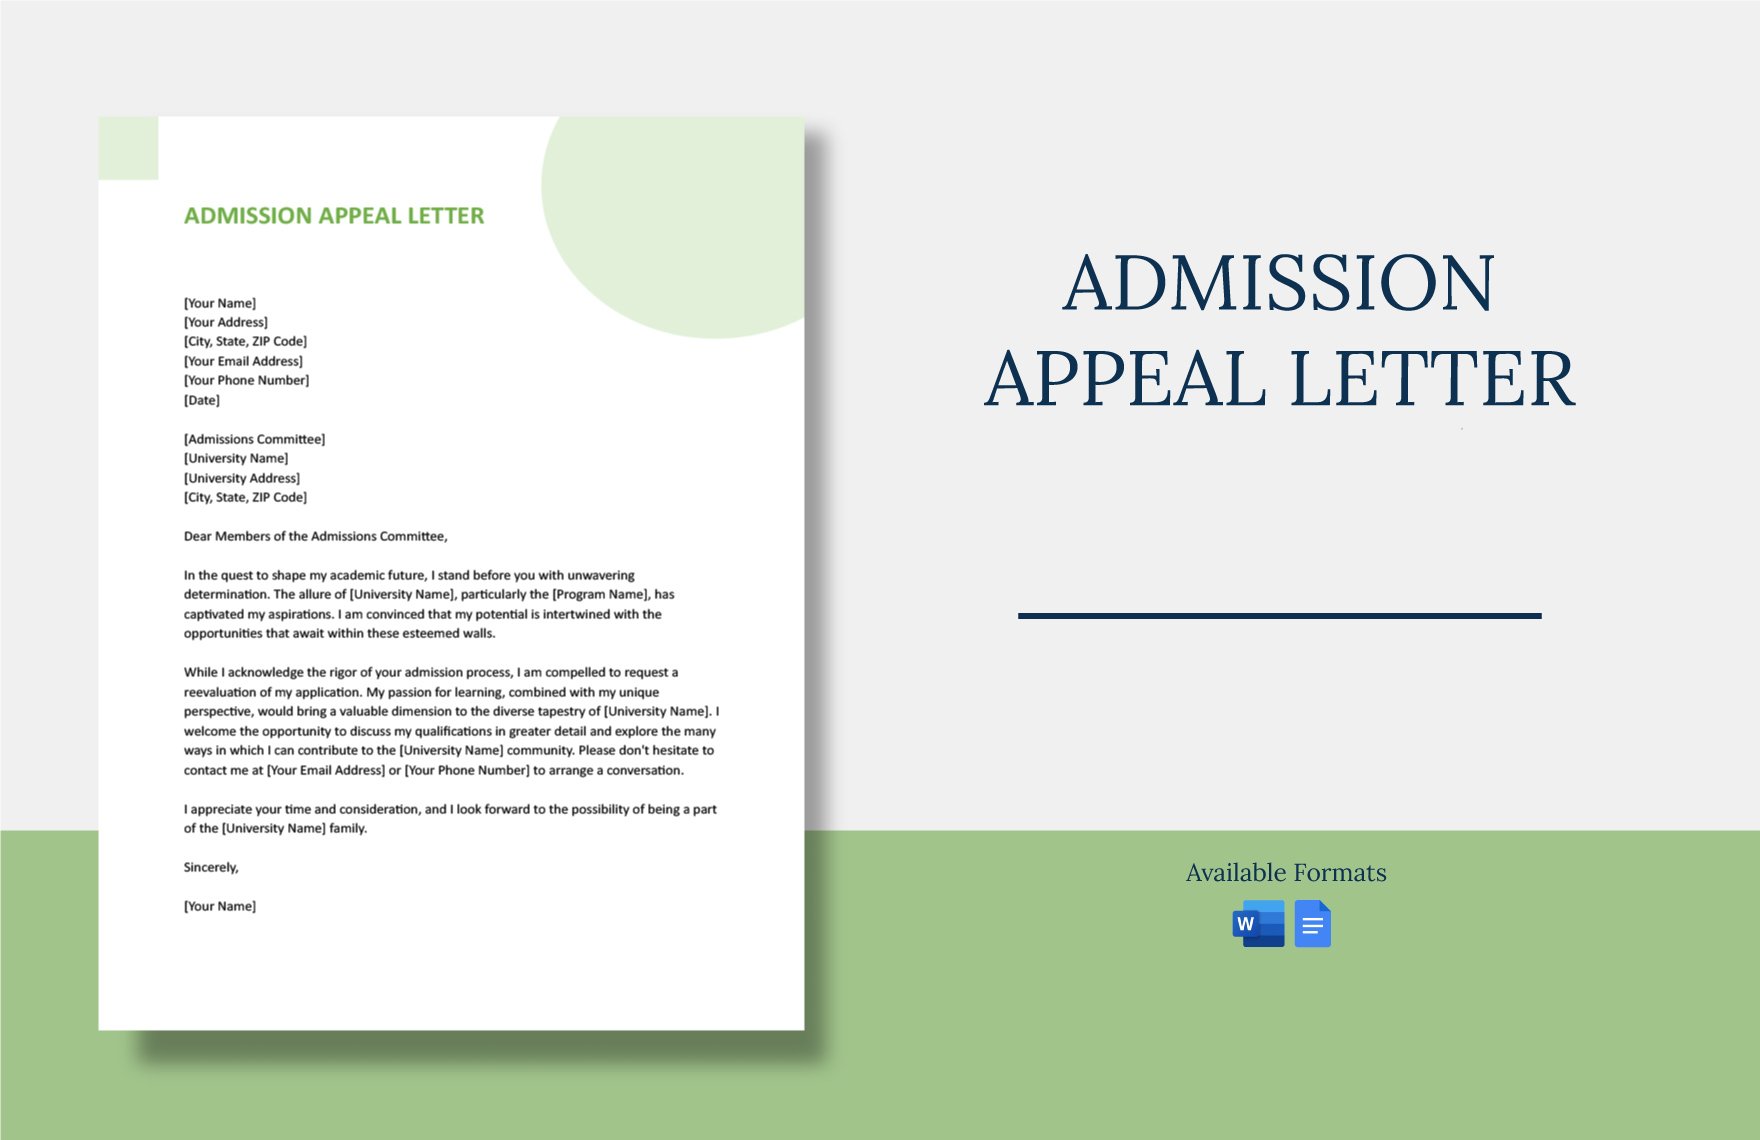 Admission Appeal Letter in Word, Google Docs